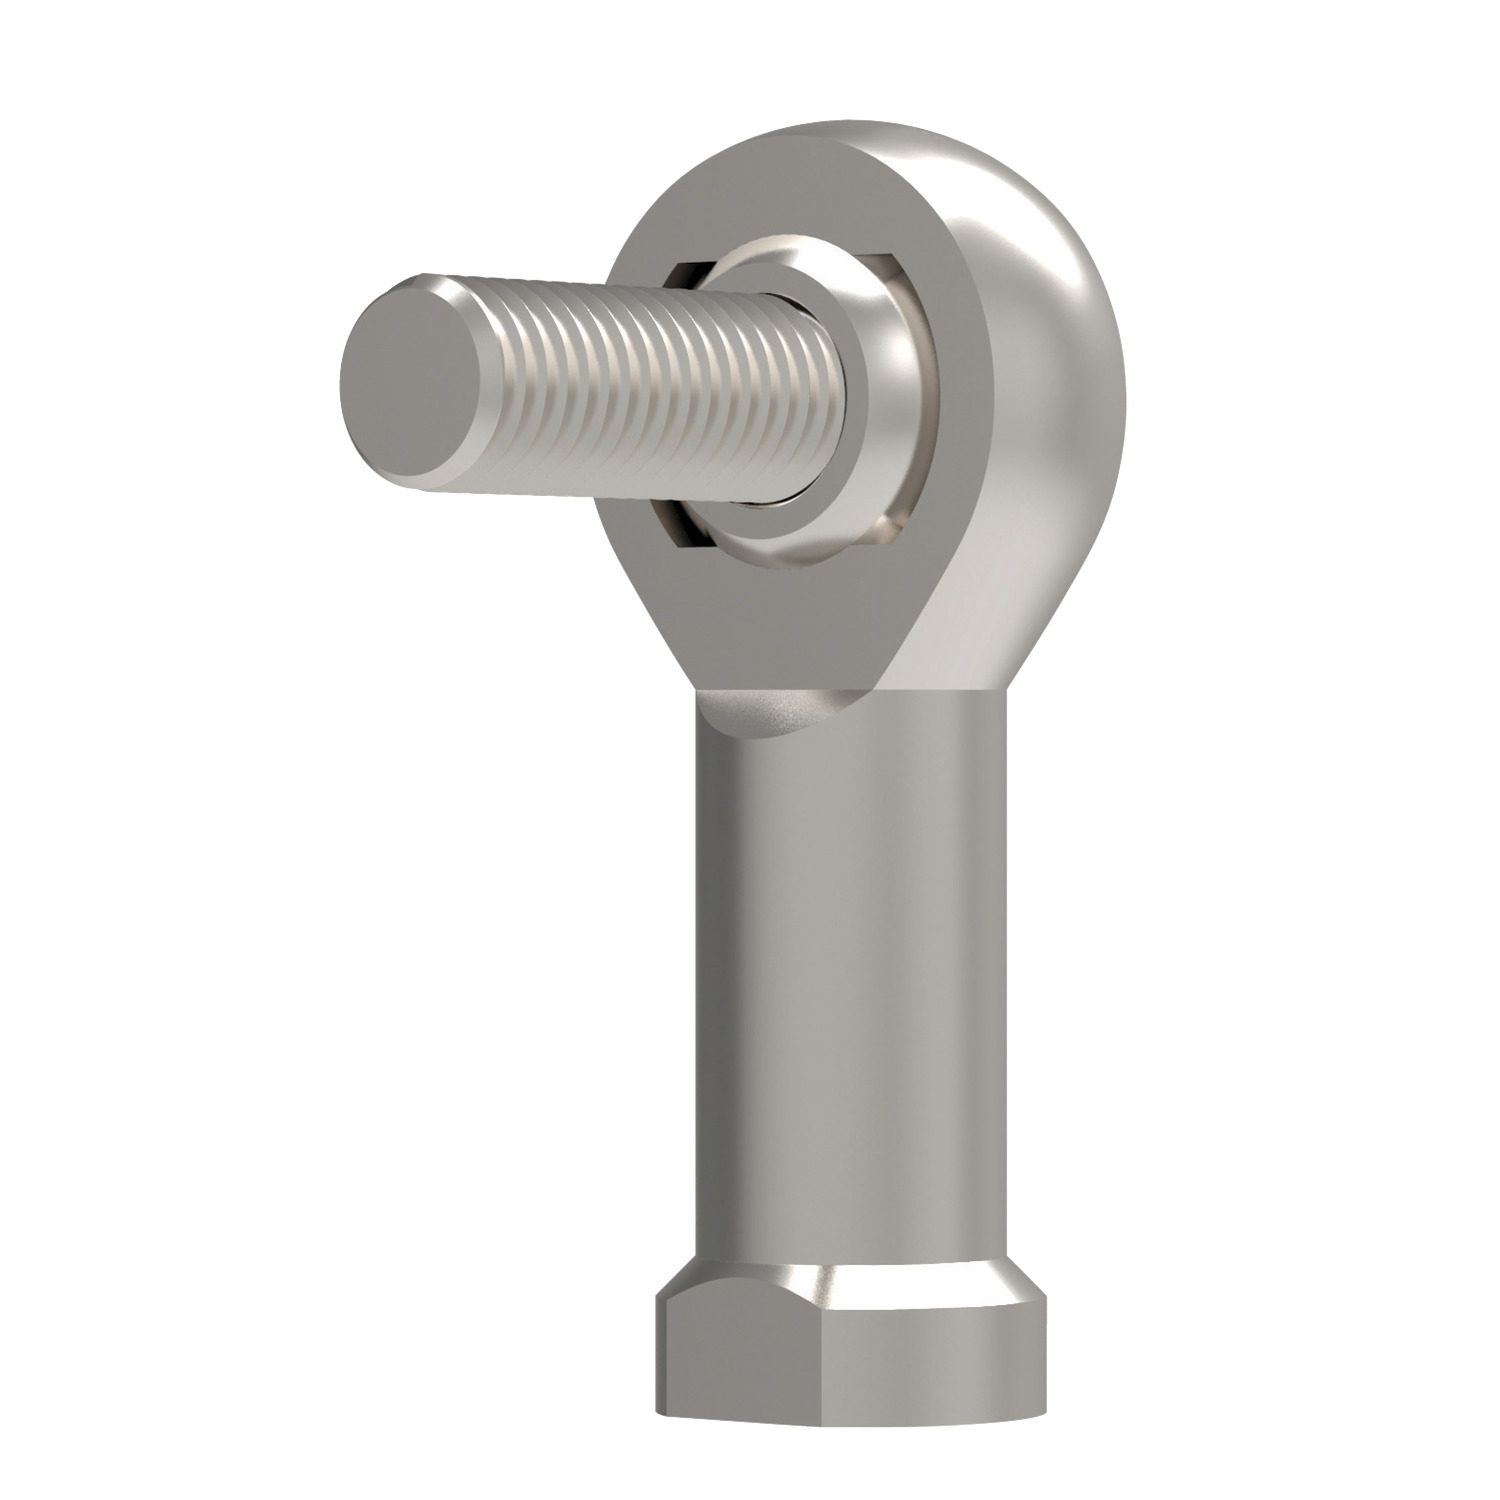 Stainless Rod End with Stud Maintenance free. Sizes according to DIN ISO 12740-4, series K